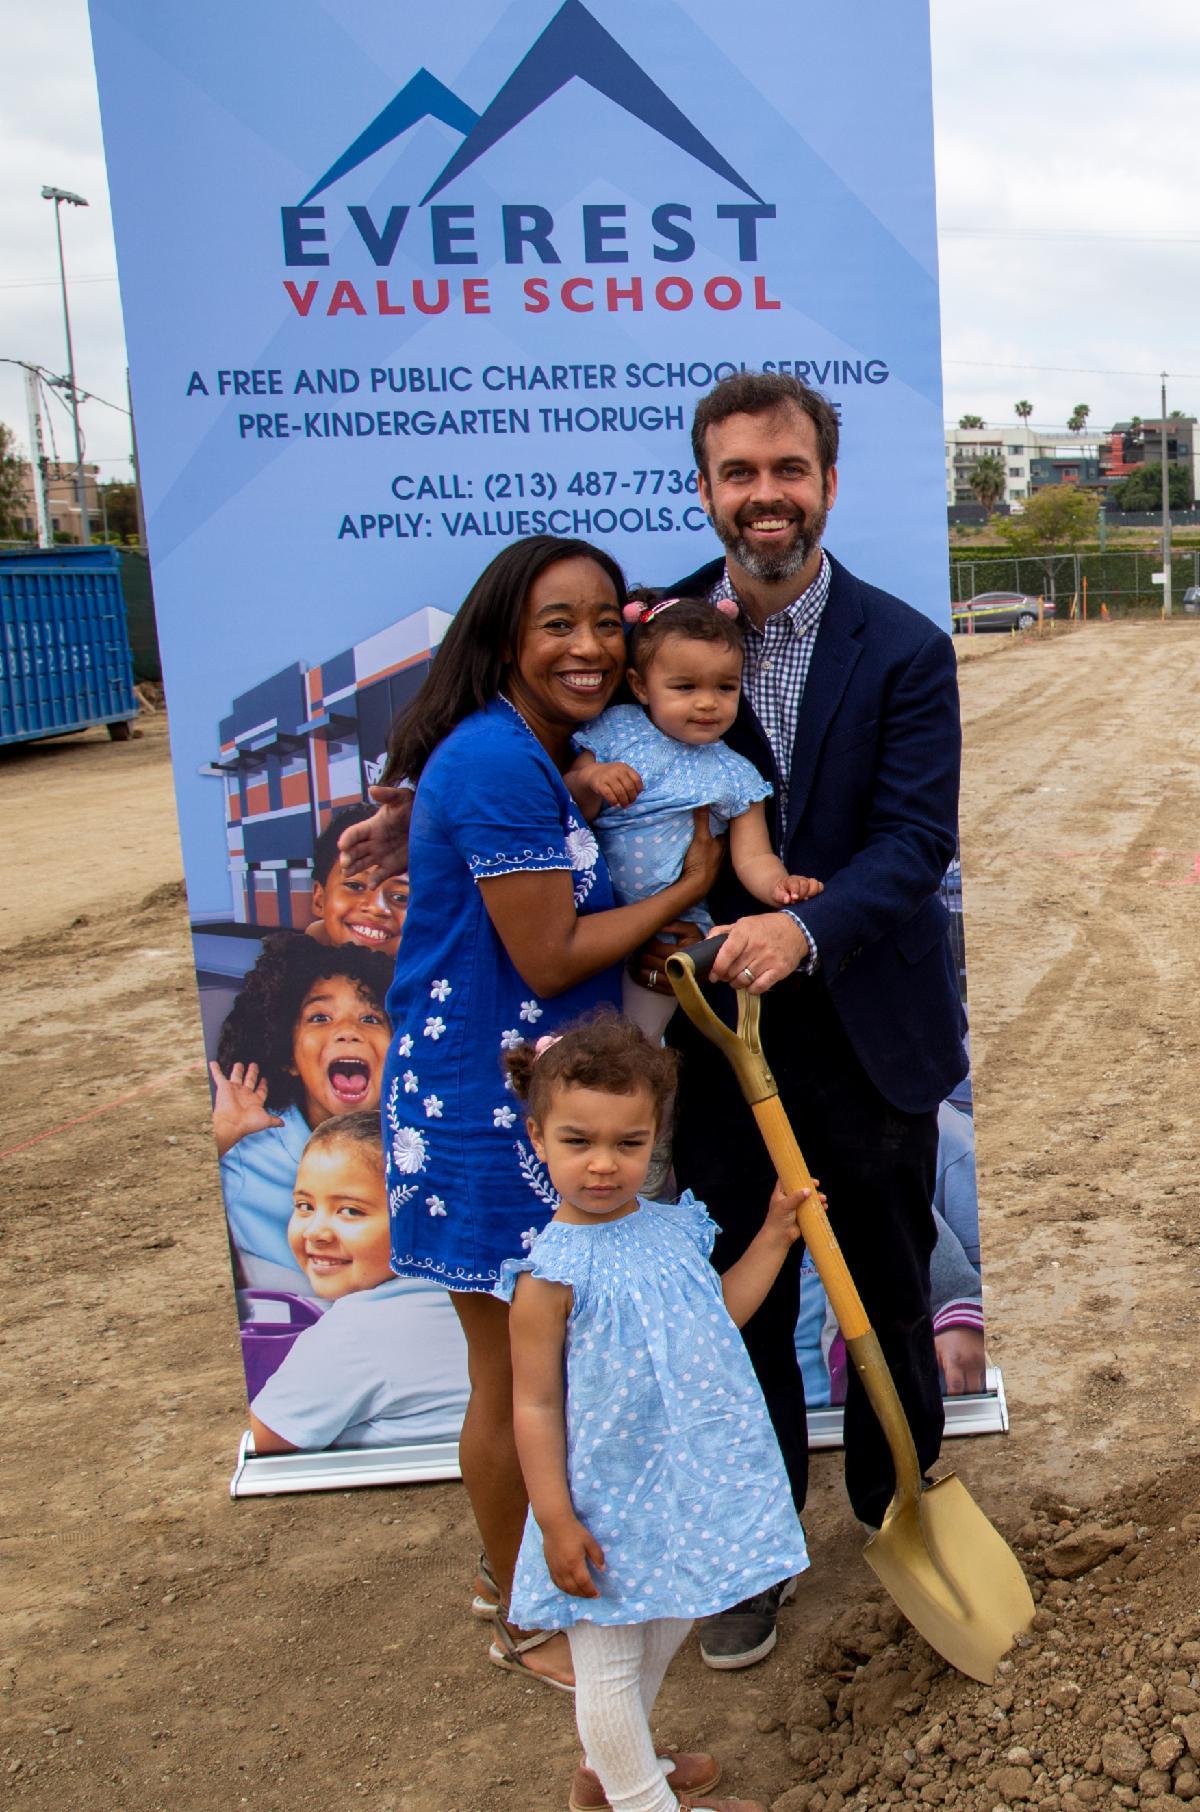 Principal Chris Medinger with his family during Everest Value School's groundbreaking.